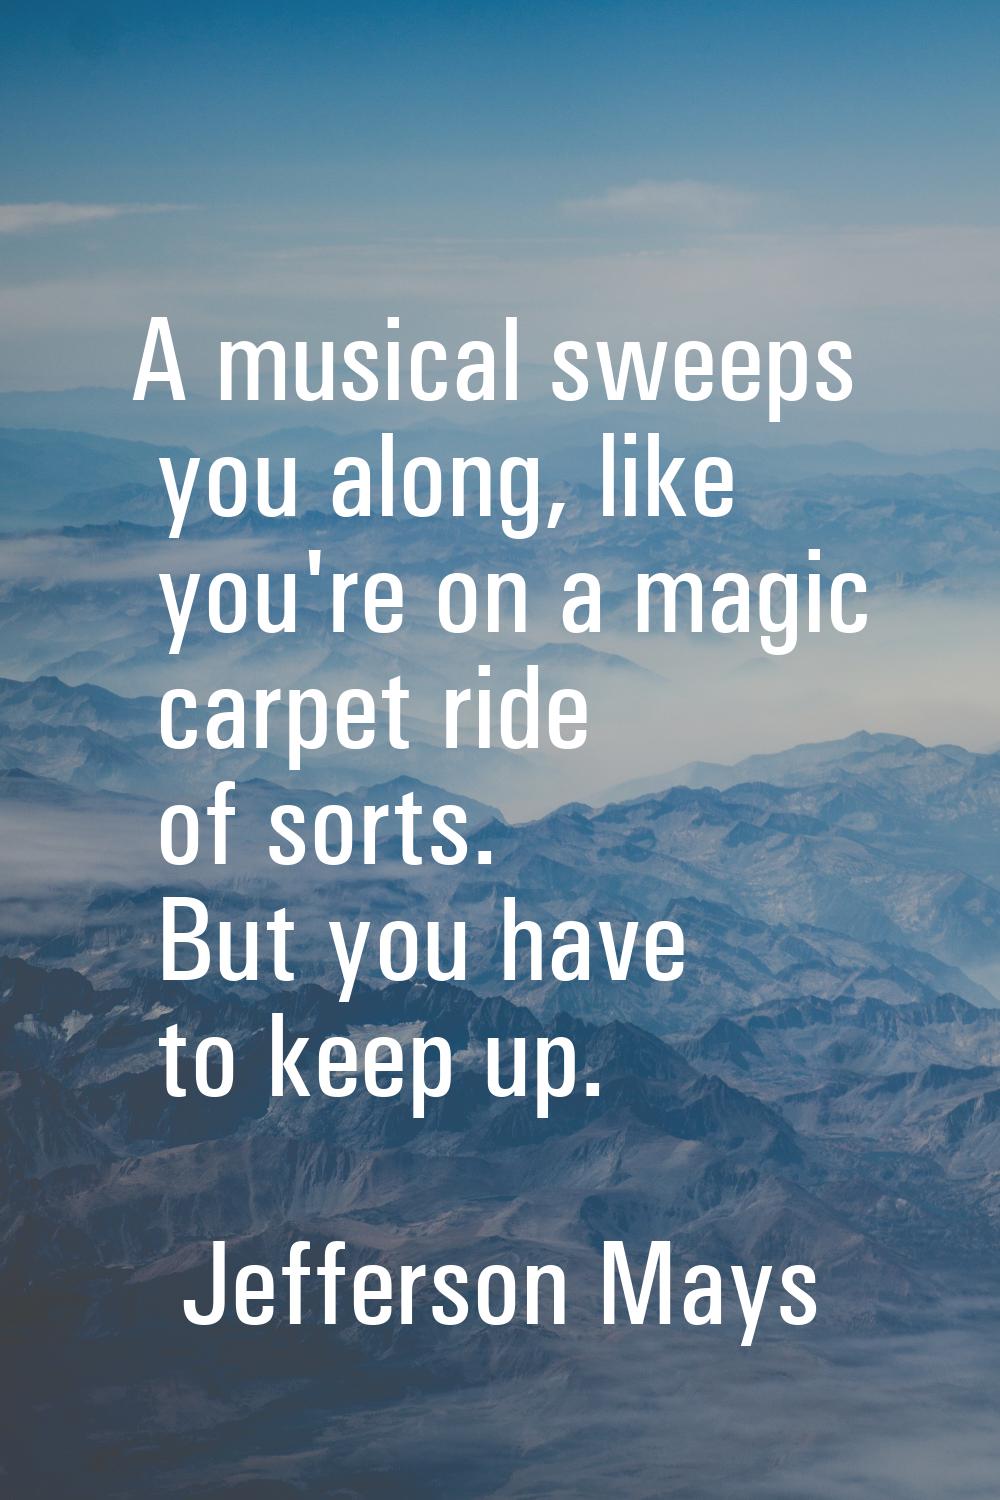 A musical sweeps you along, like you're on a magic carpet ride of sorts. But you have to keep up.